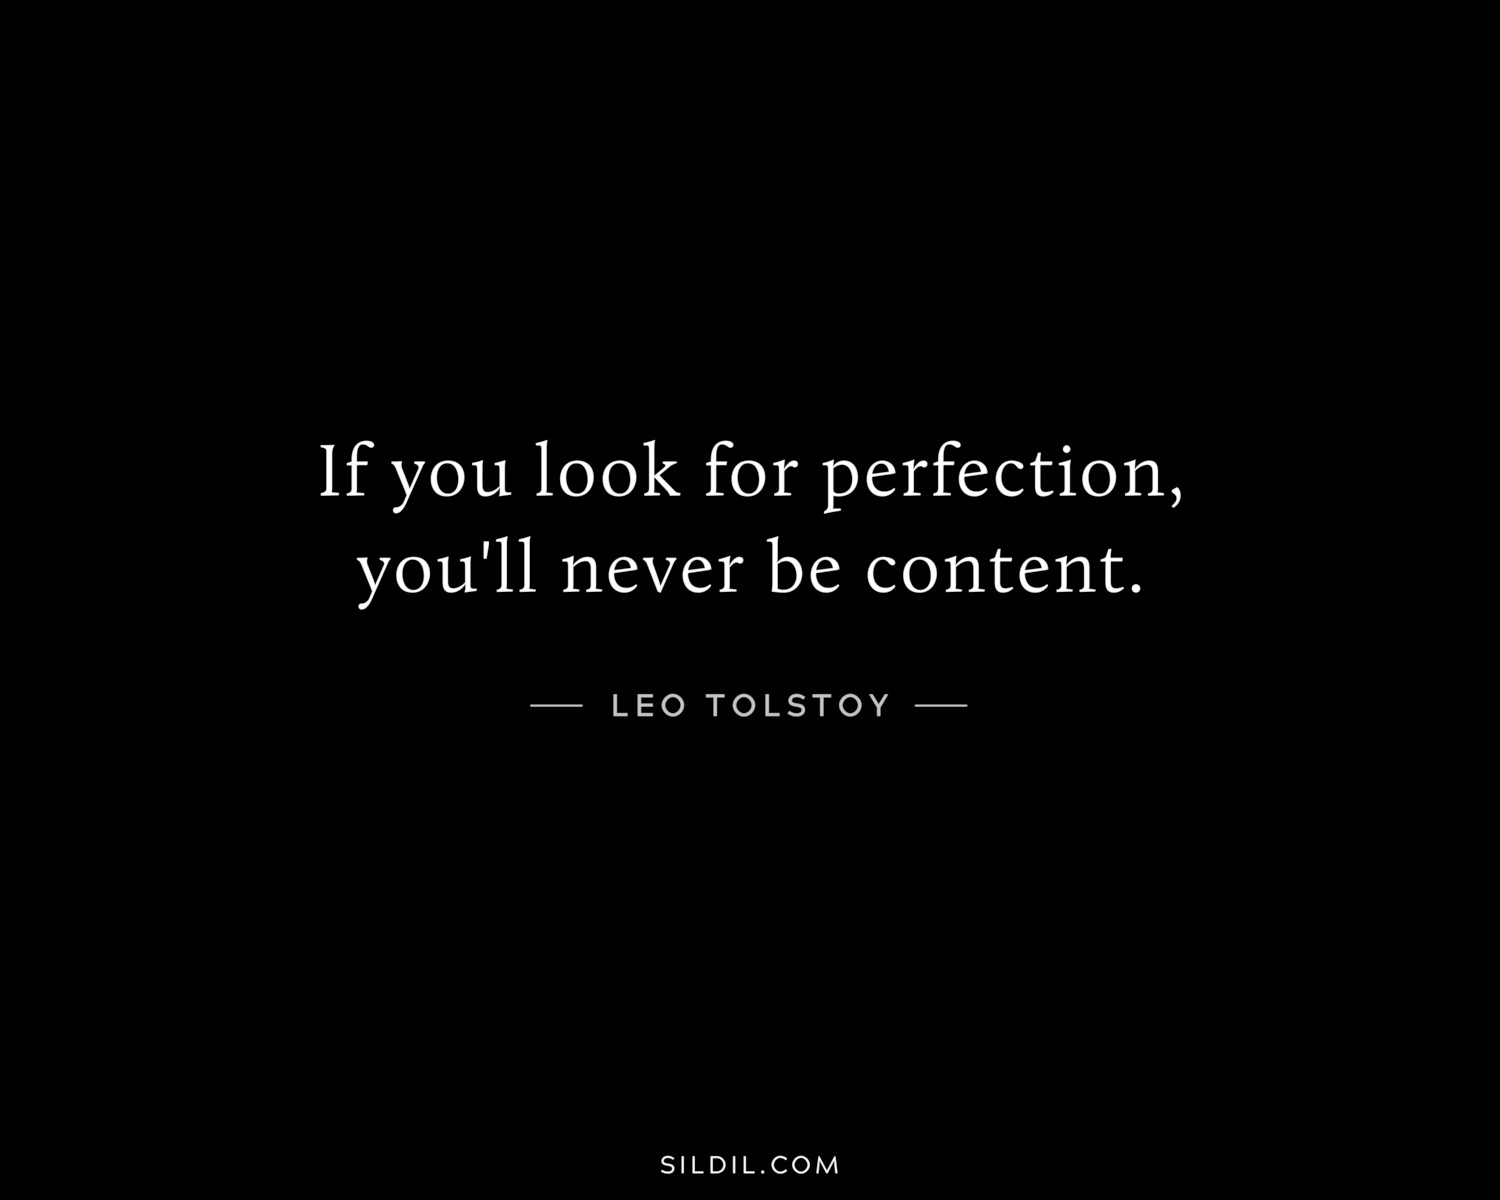 If you look for perfection, you'll never be content.